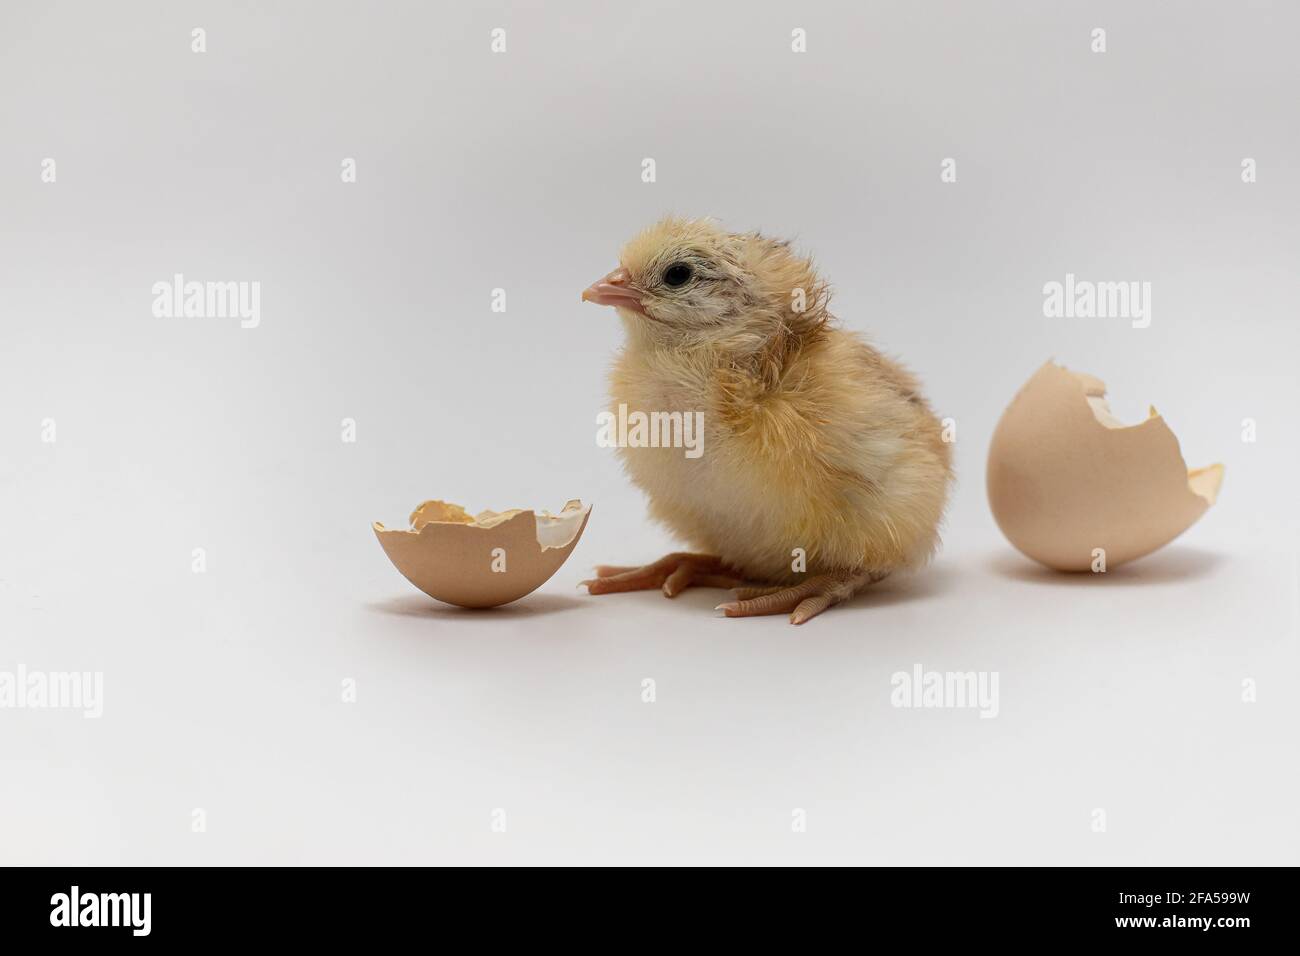 Chicken and an egg shell on white background.Newborn yellow chicken with eggshell Stock Photo